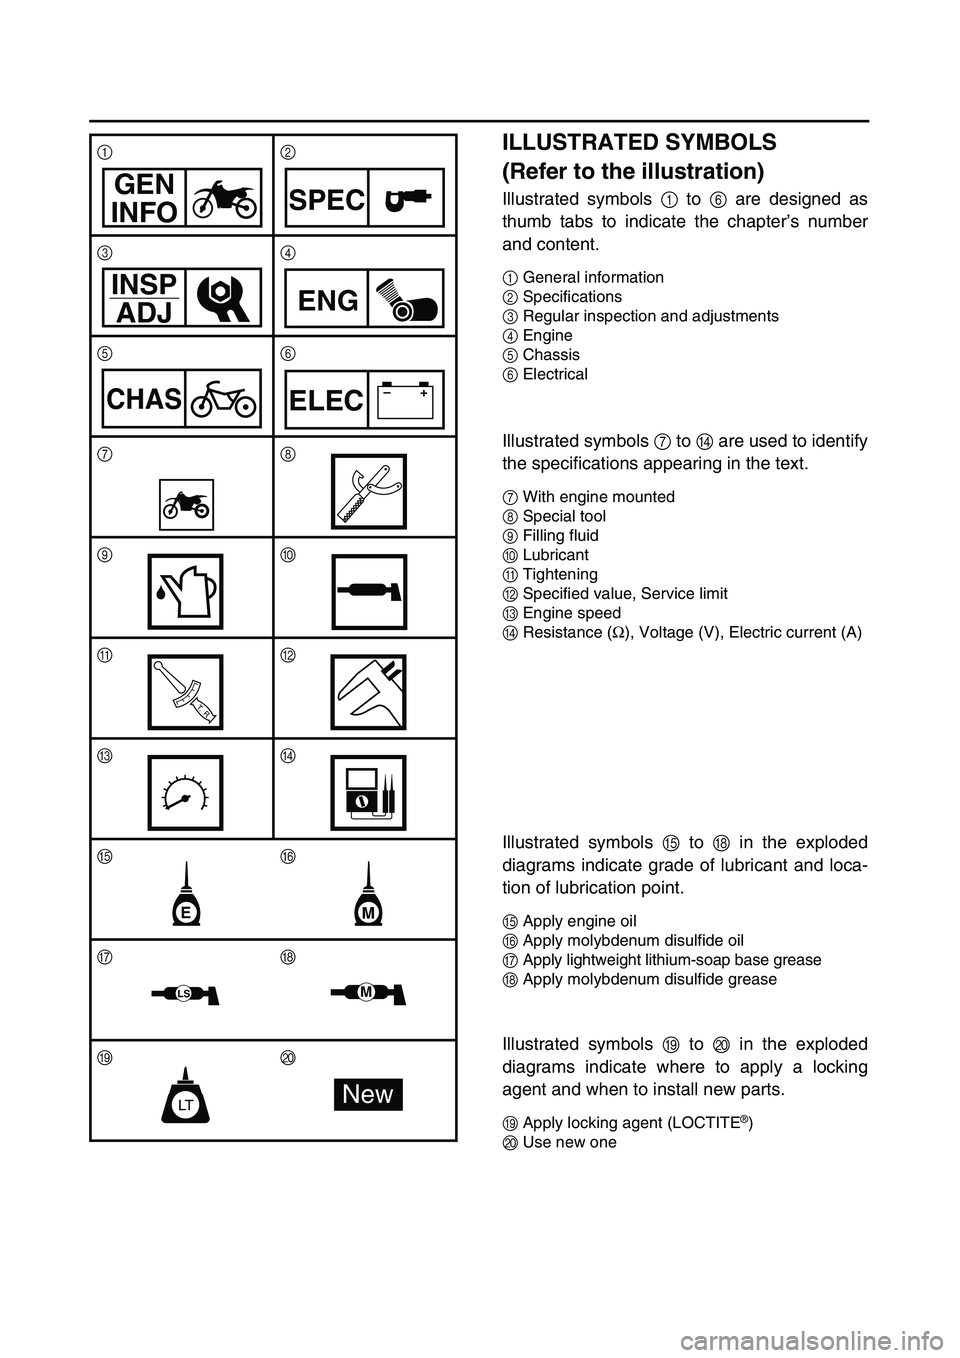 YAMAHA TTR125 2005 User Guide  
ILLUSTRATED SYMBOLS 
(Refer to the illustration) 
Illustrated symbols  
1  
 to   
6  
 are designed as
thumb tabs to indicate the chapter’s number
and content. 
1 
General information 
2 
Specifi